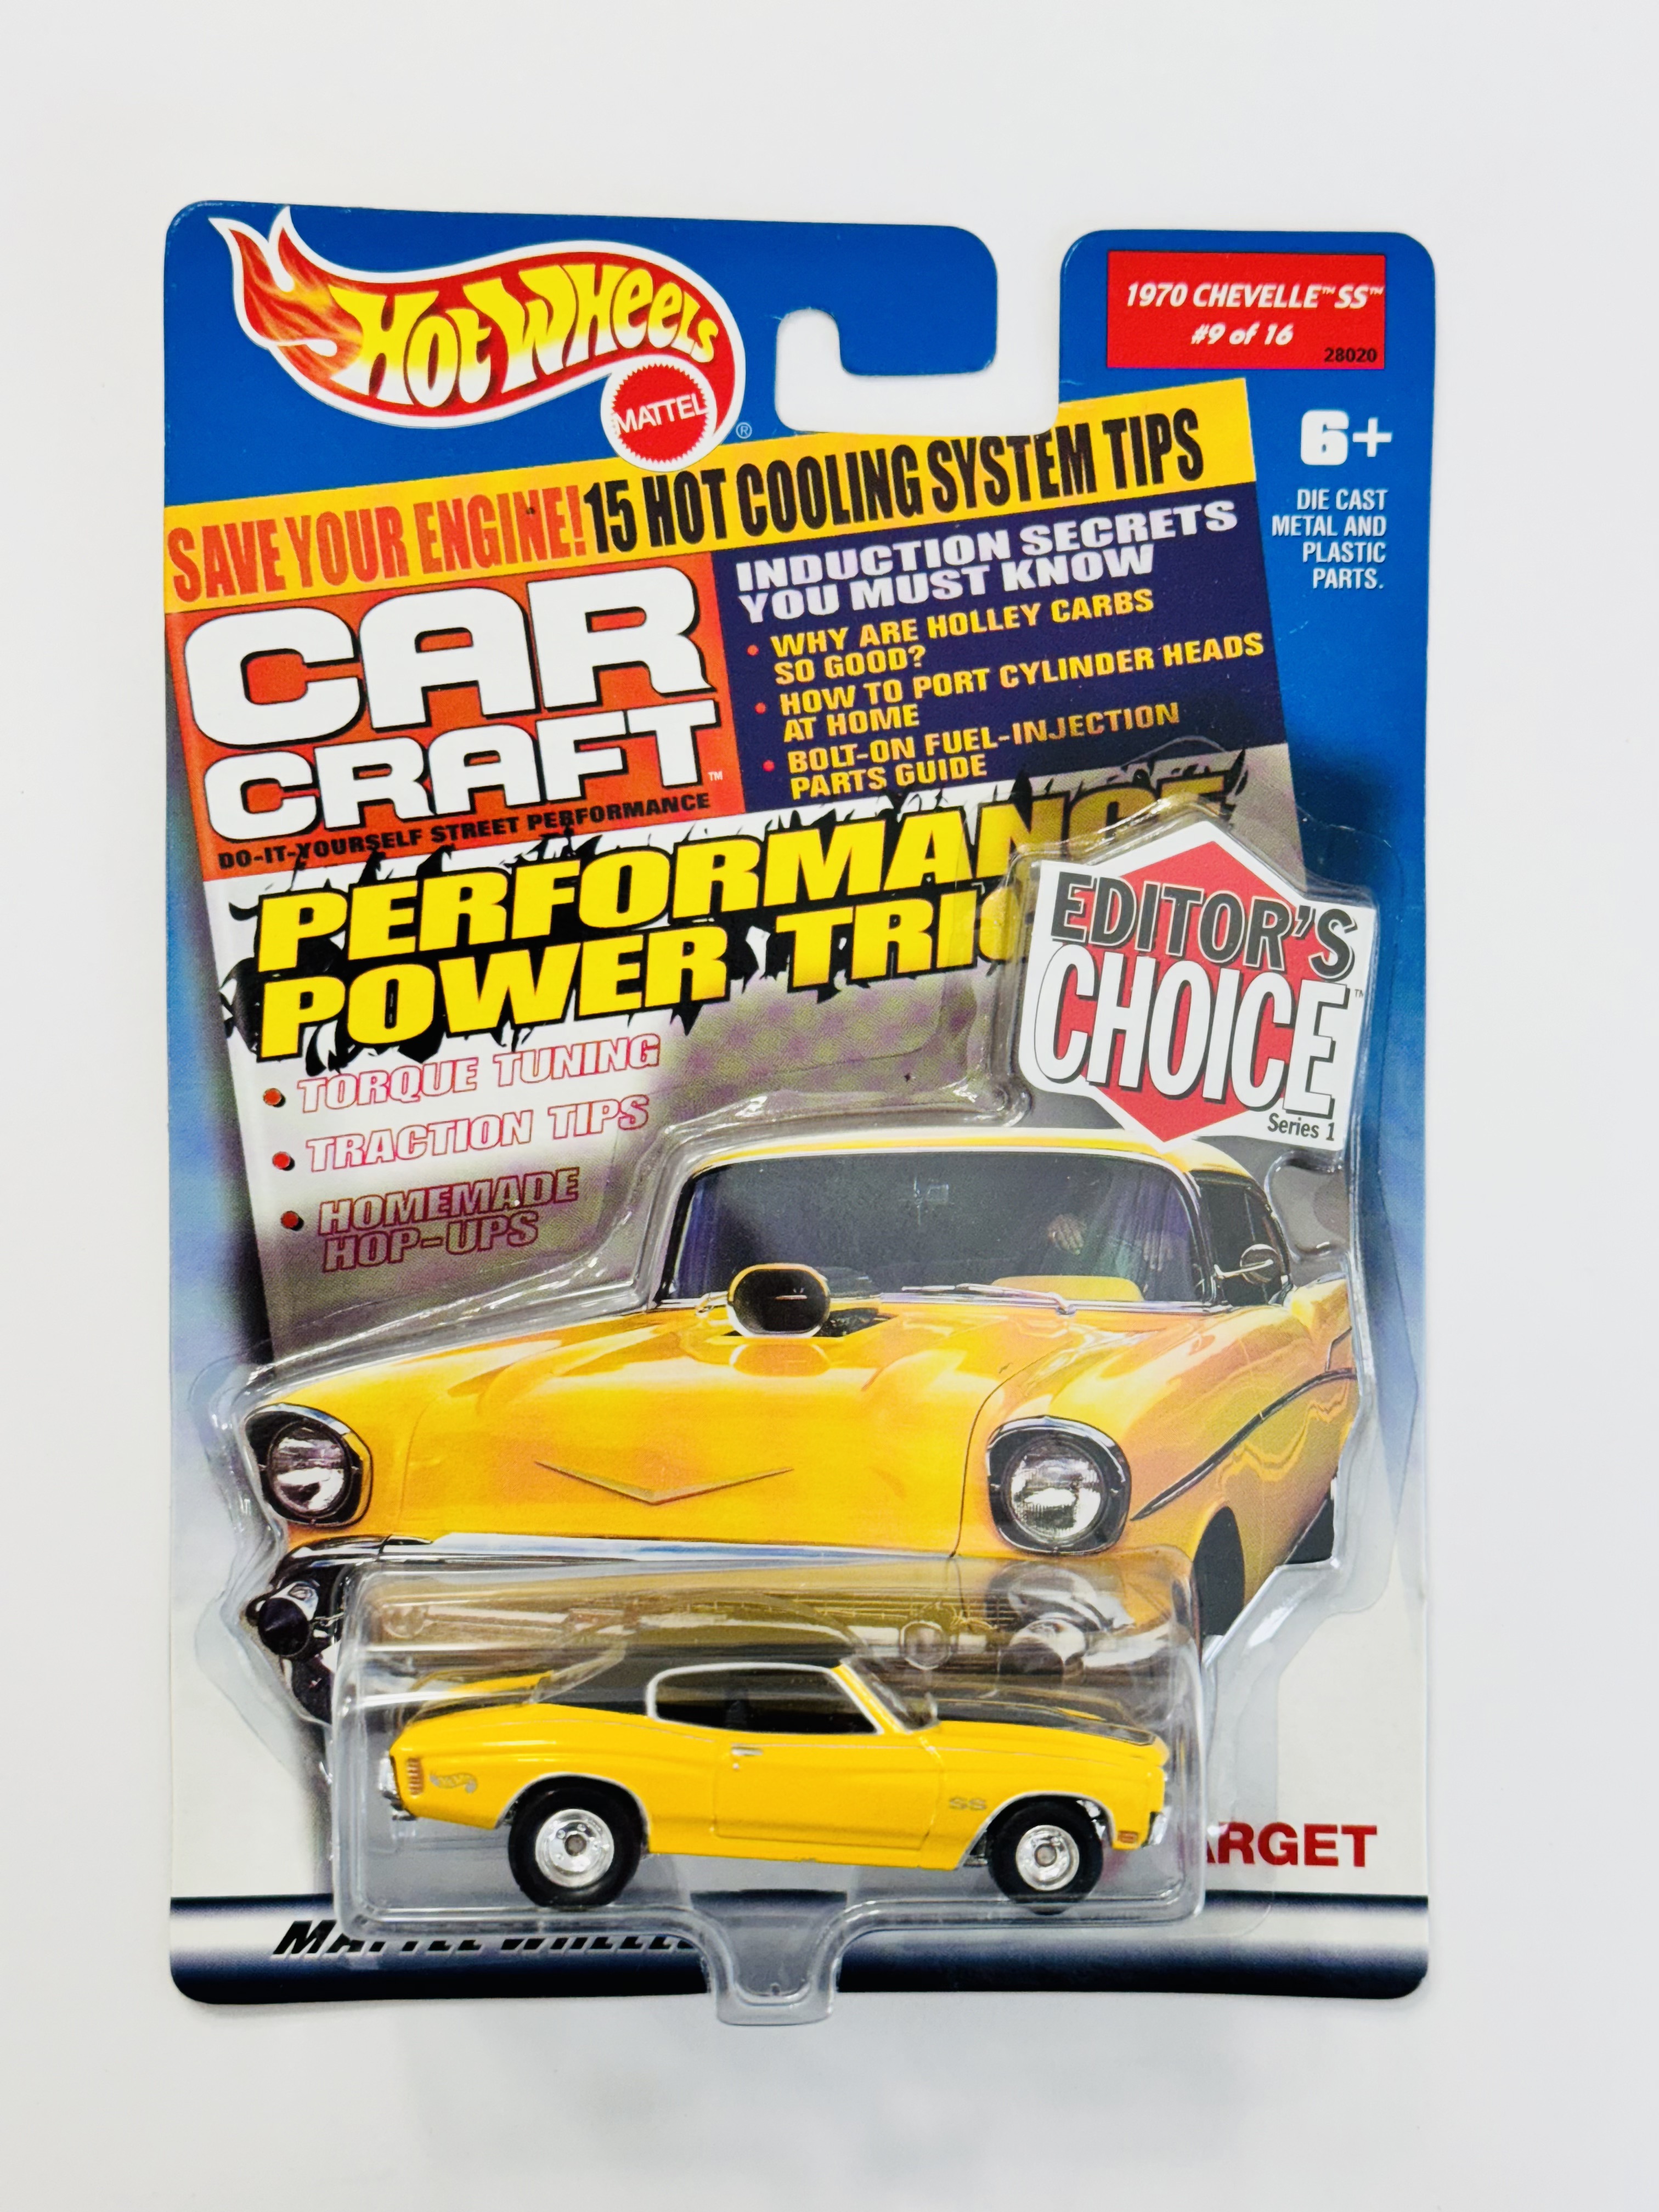 Hot Wheels Target Exclusive Editors Choice 1970 Chevelle SS